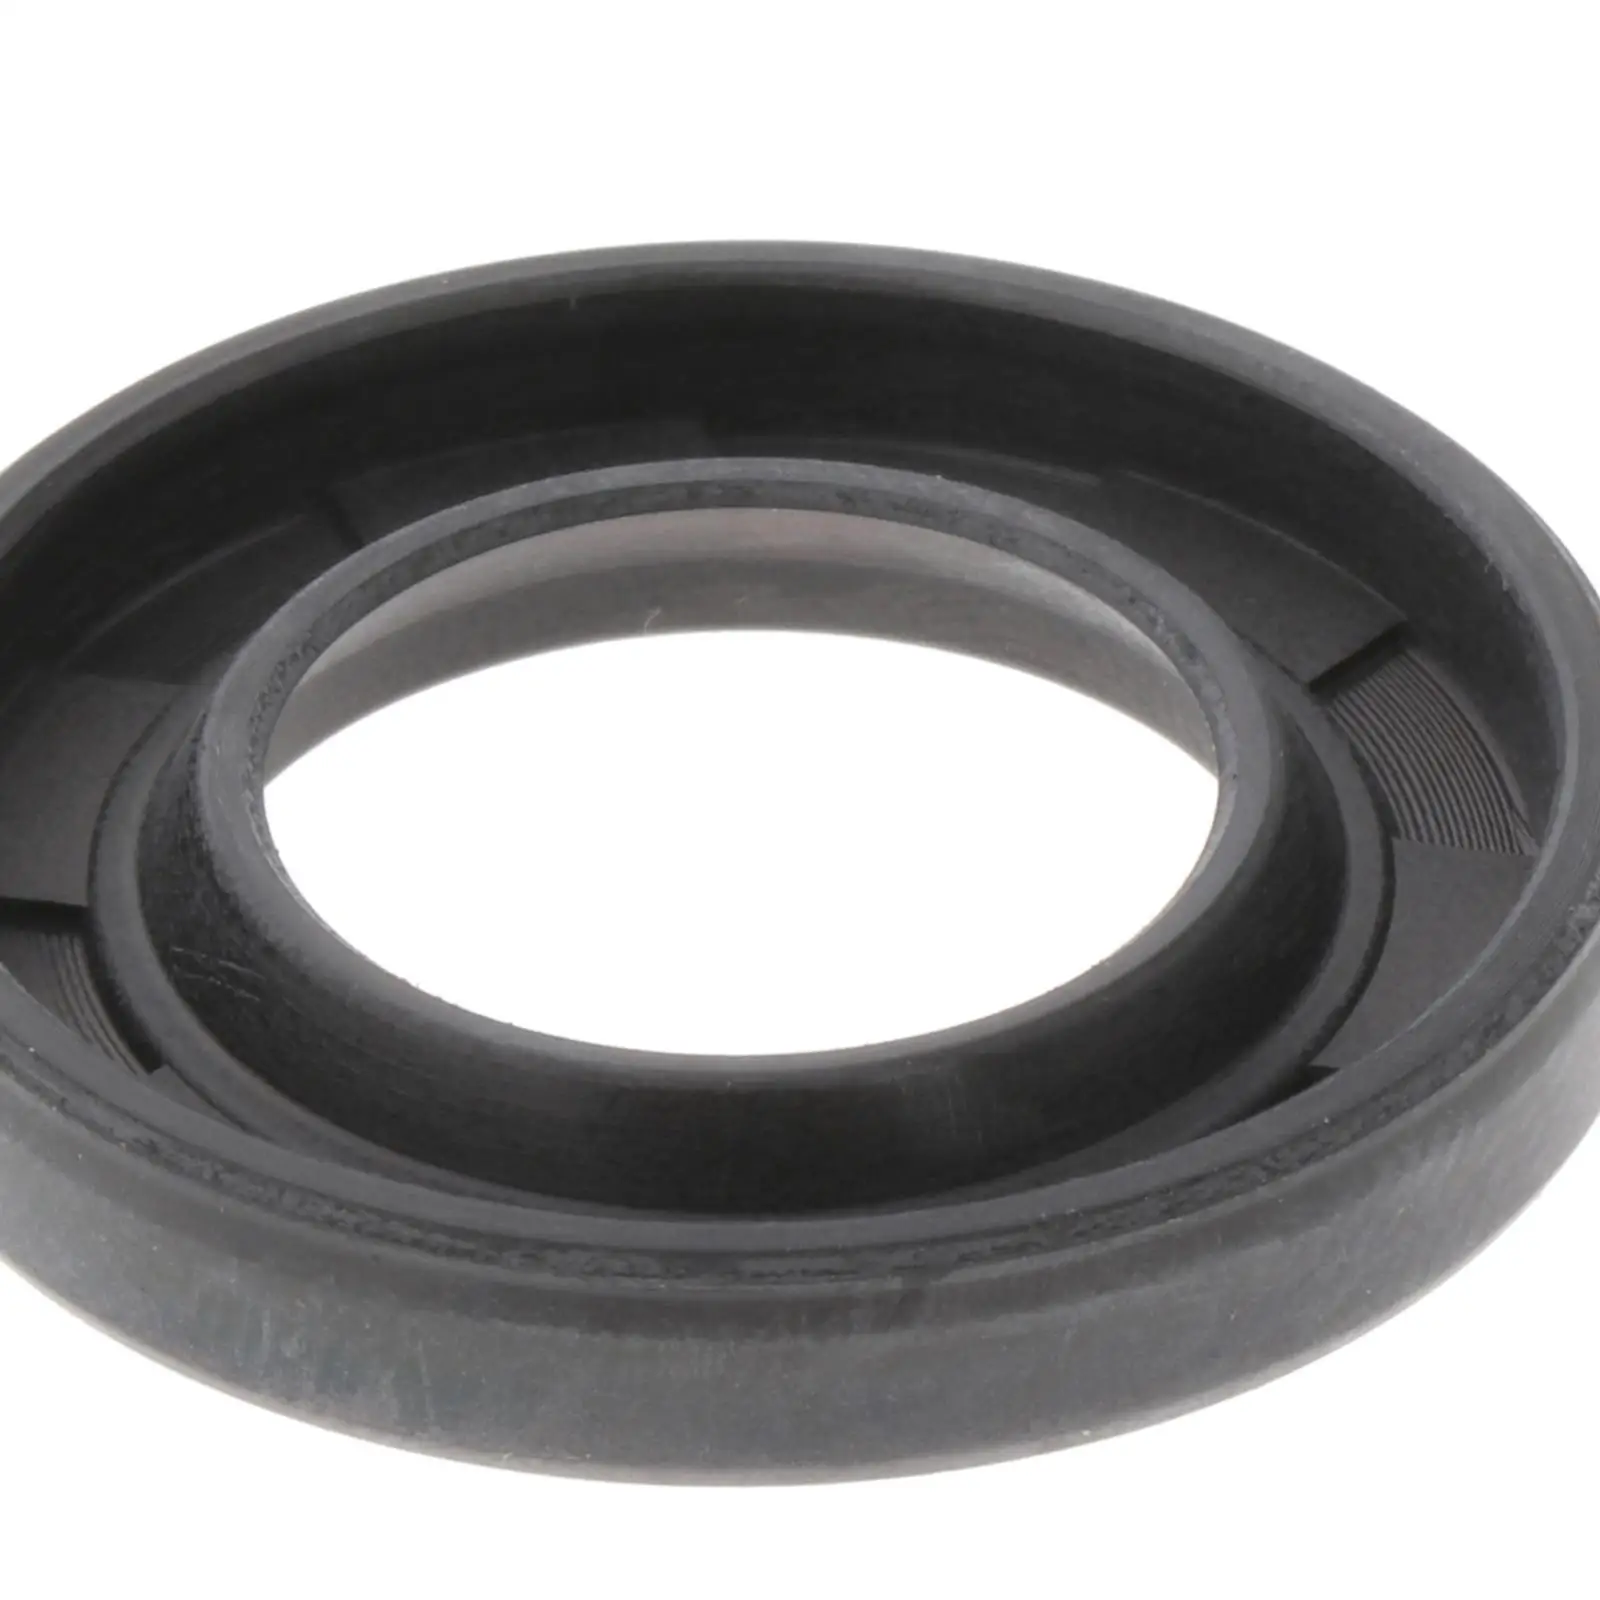 Oil Seal Replaces 93106-18M01 Fit for Yamaha Outboard Motor 60HP 70HP 2 Stroke 3cyl Outboard Engine